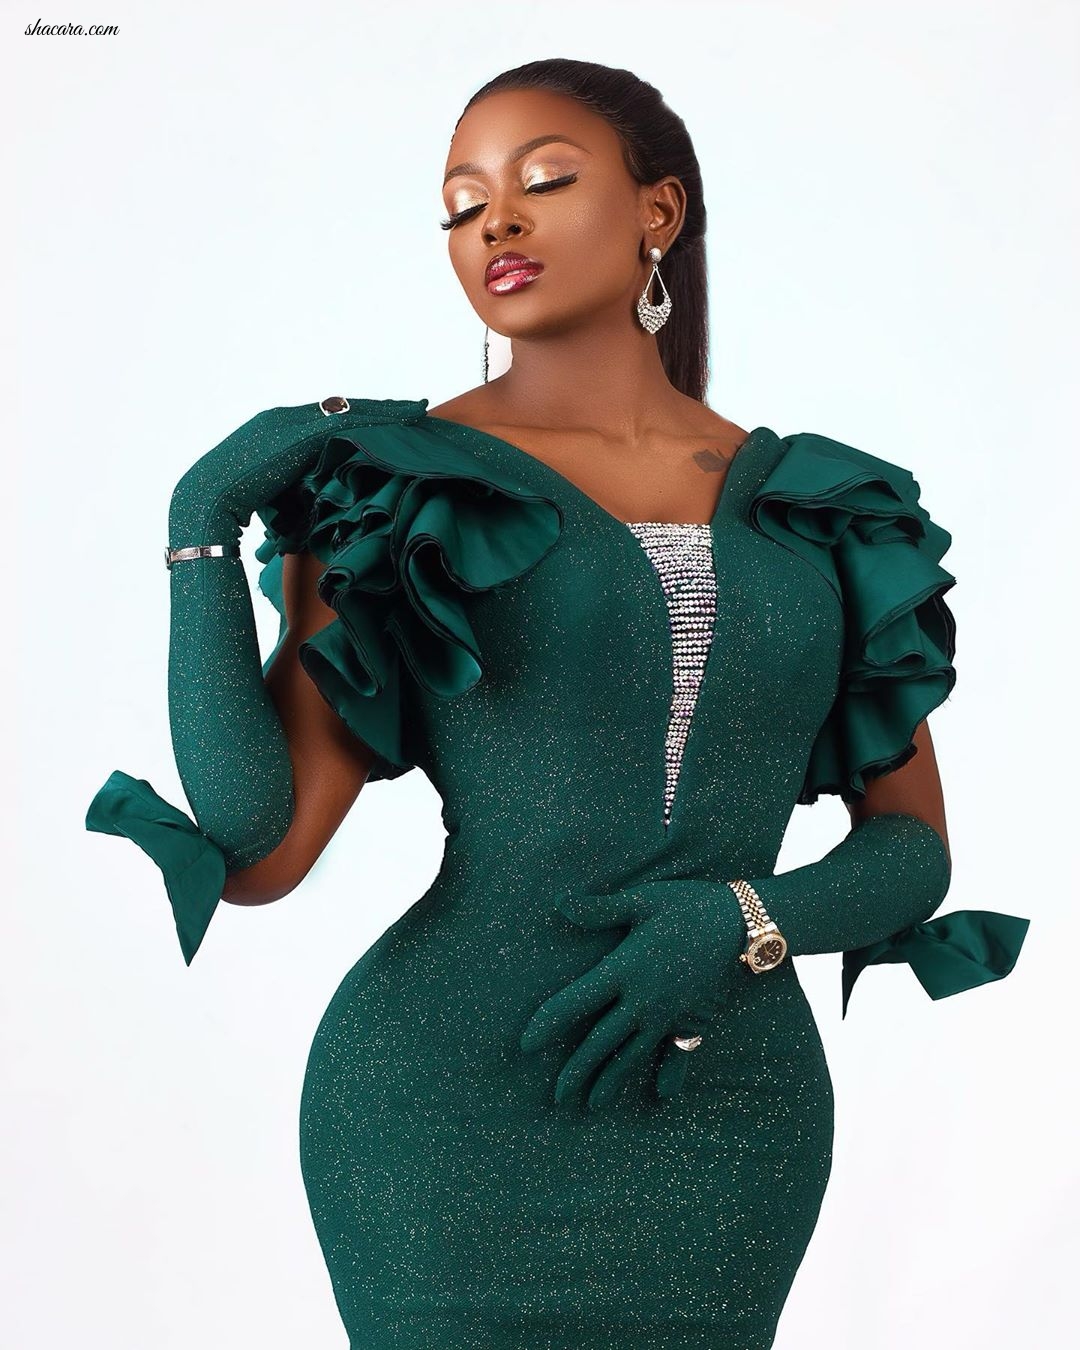 Ka3na Wore Not One, But *Two* Glam Dresses For 2020 Green October Event